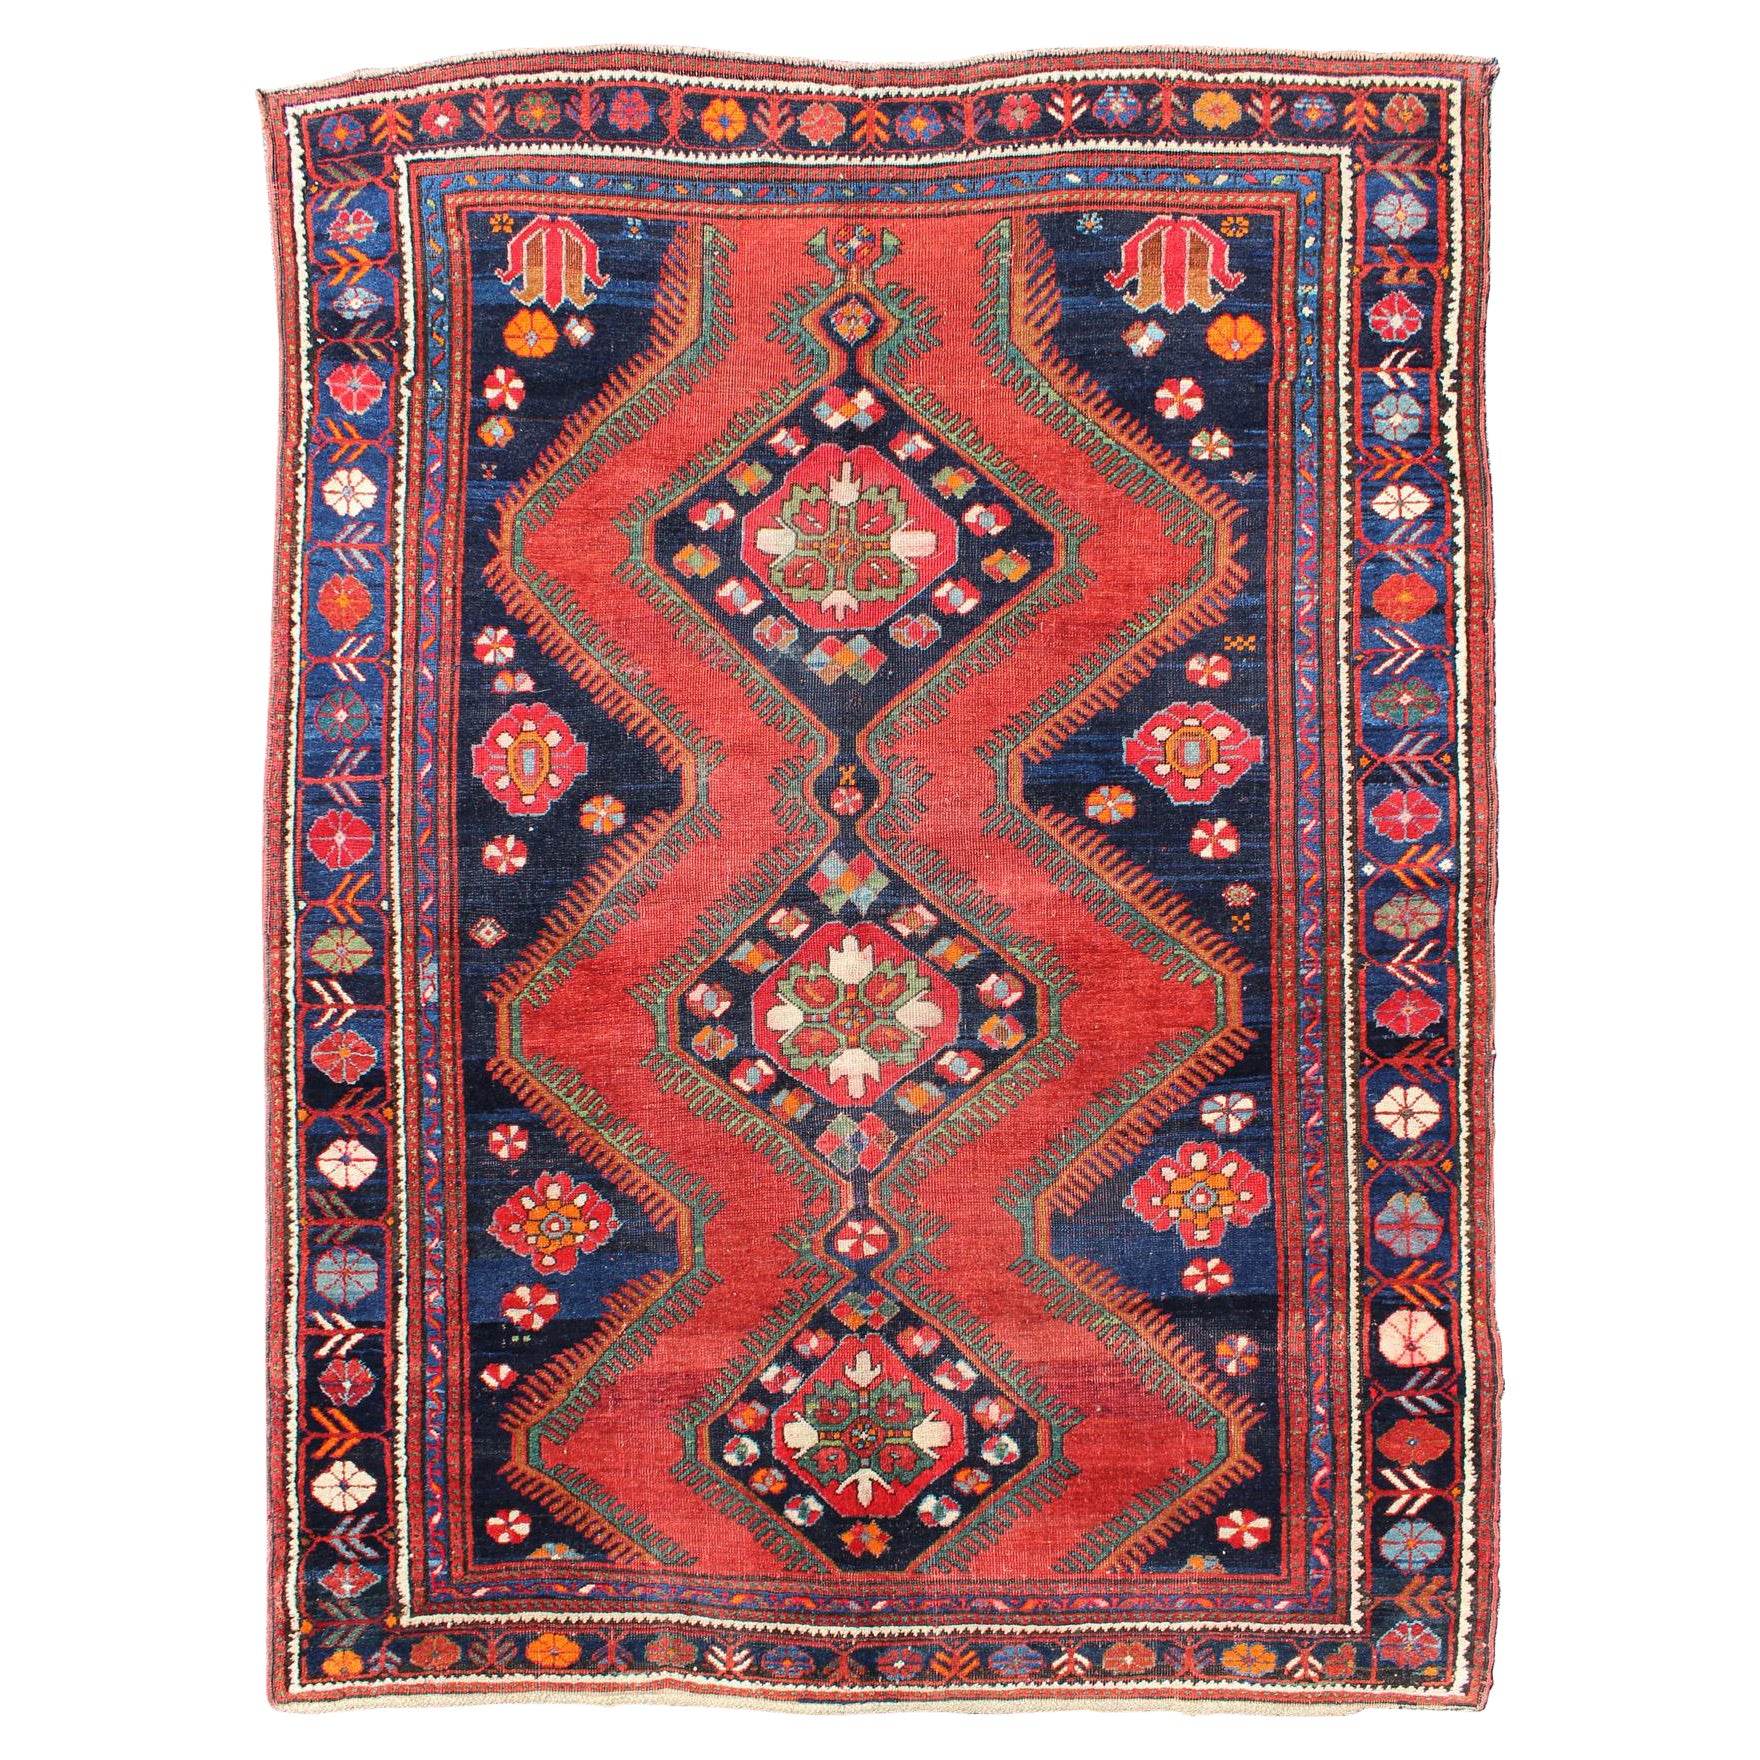 Antique Caucasian Karabagh Rug in Red, Navy Blue with Geometric Medallions